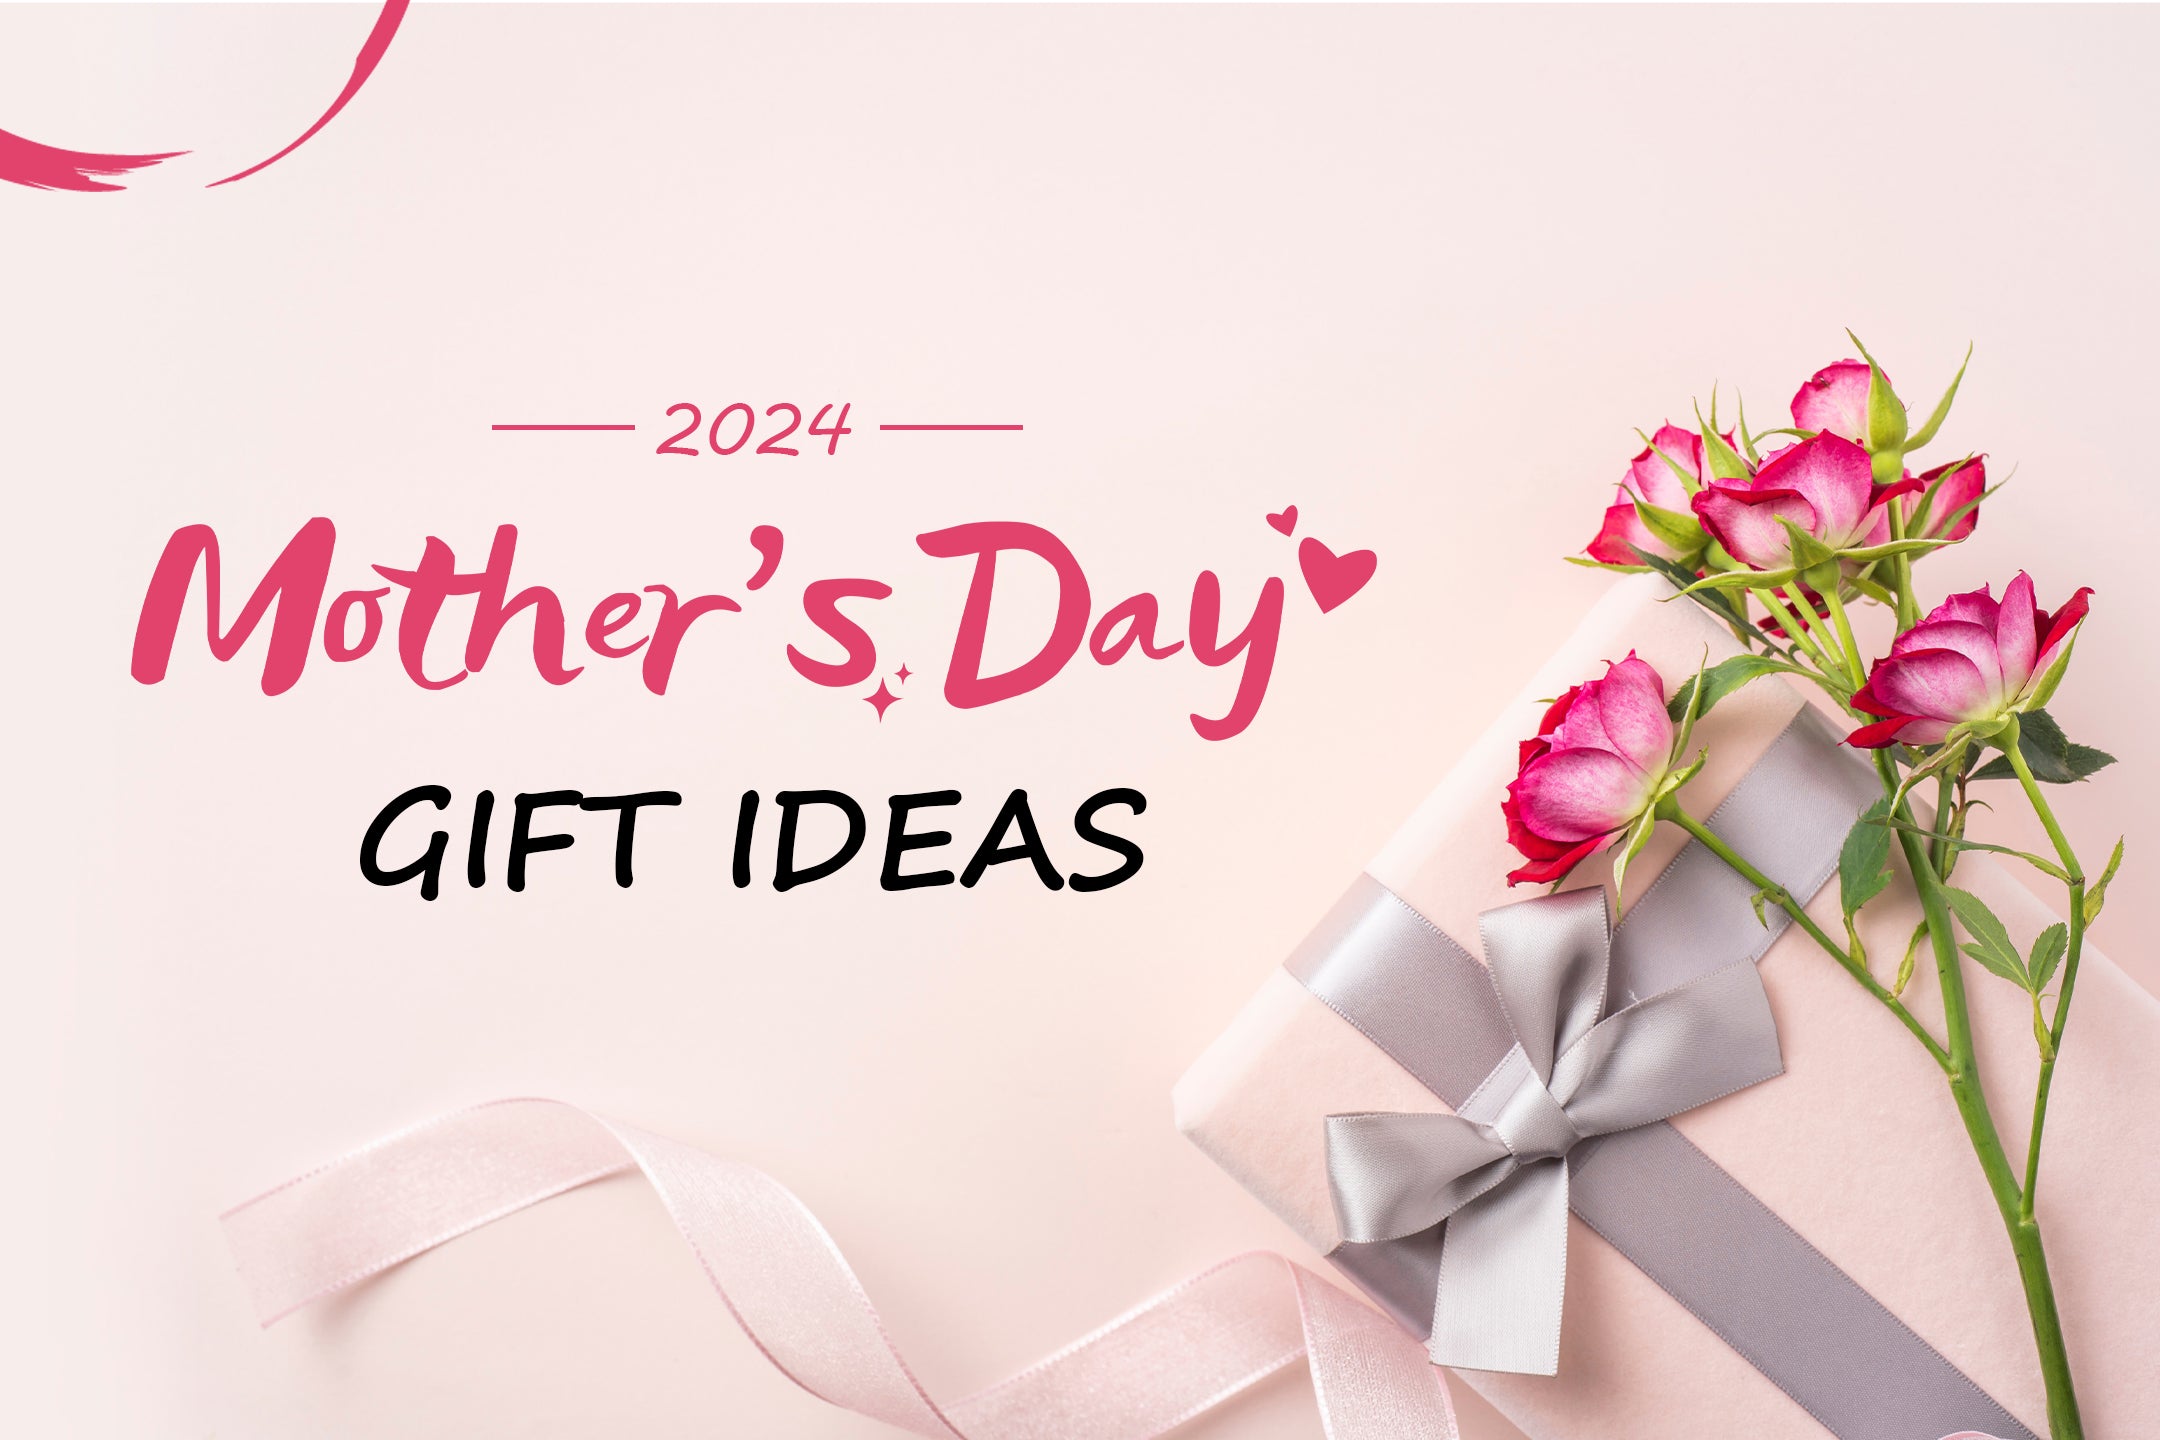 A Mother's Day Gift Guide: Thoughtful Ideas to Delight Mom